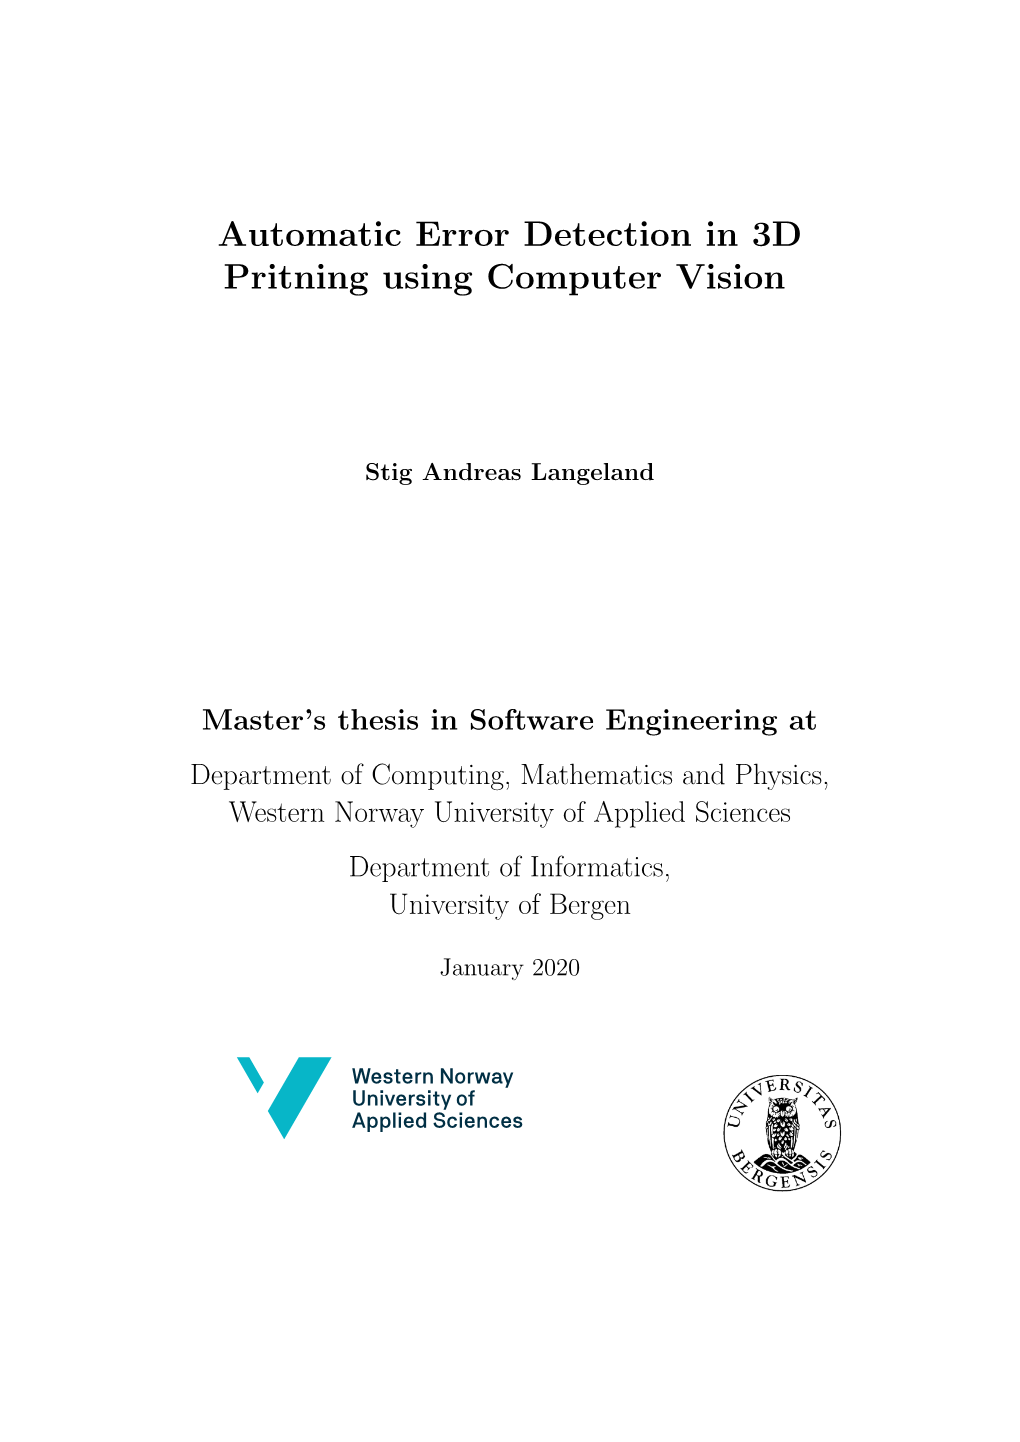 Automatic Error Detection in 3D Pritning Using Computer Vision